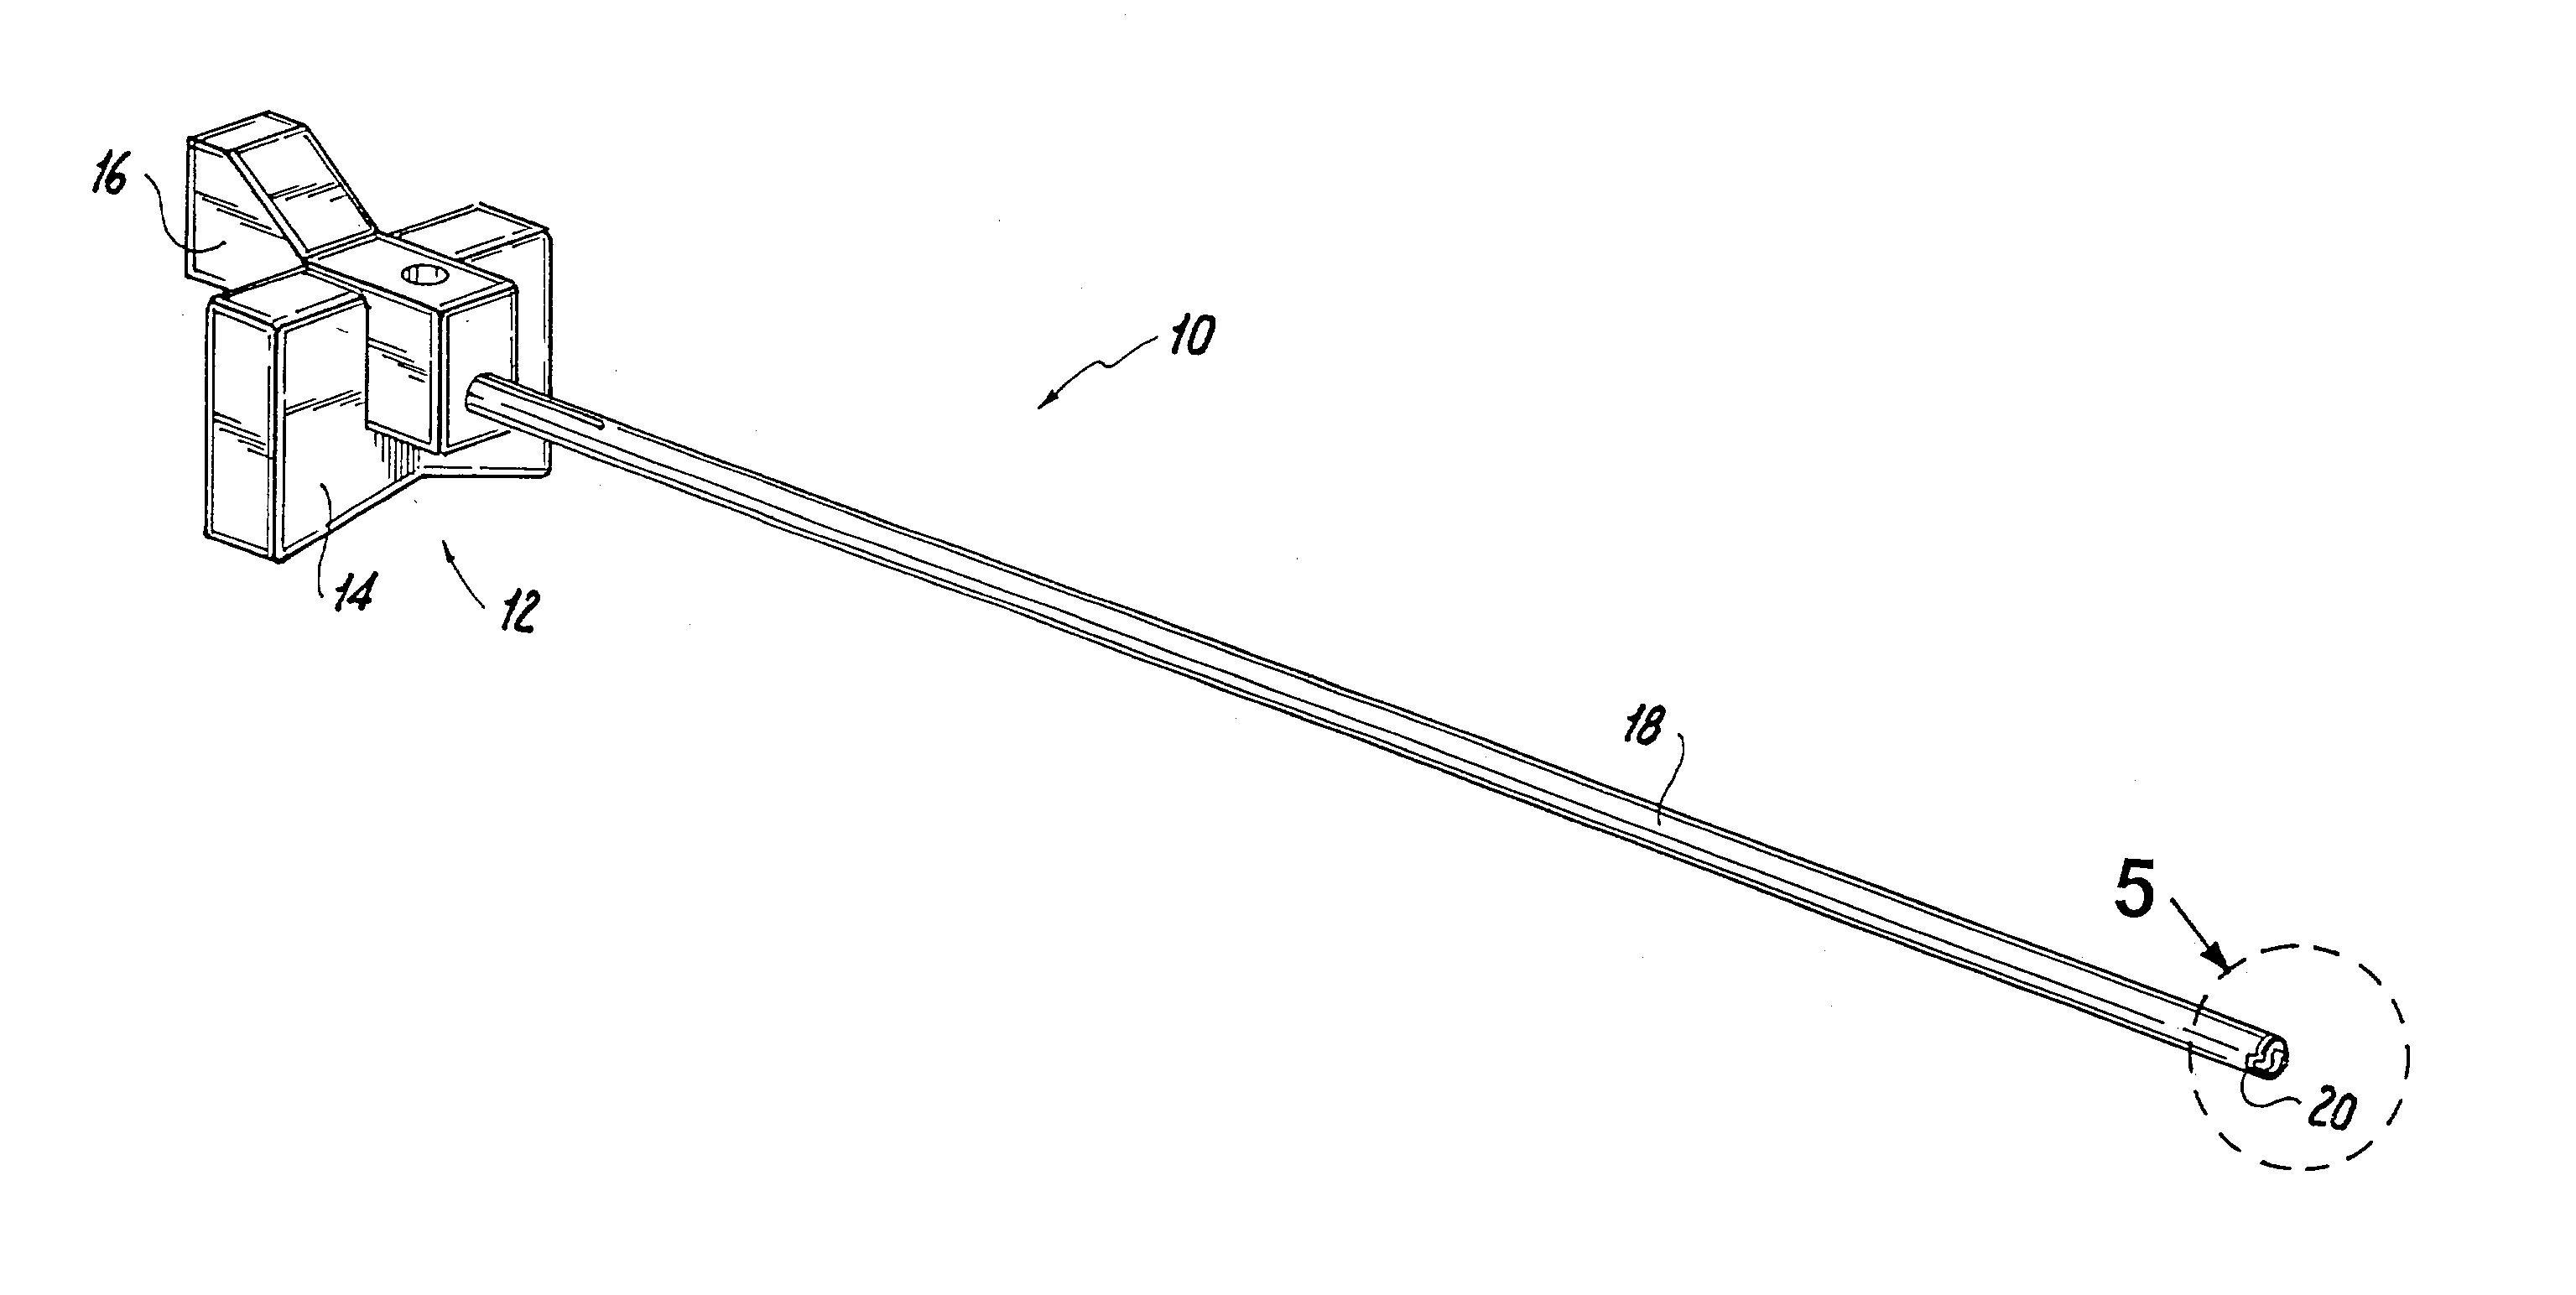 Apparatus for suturing a blood vessel